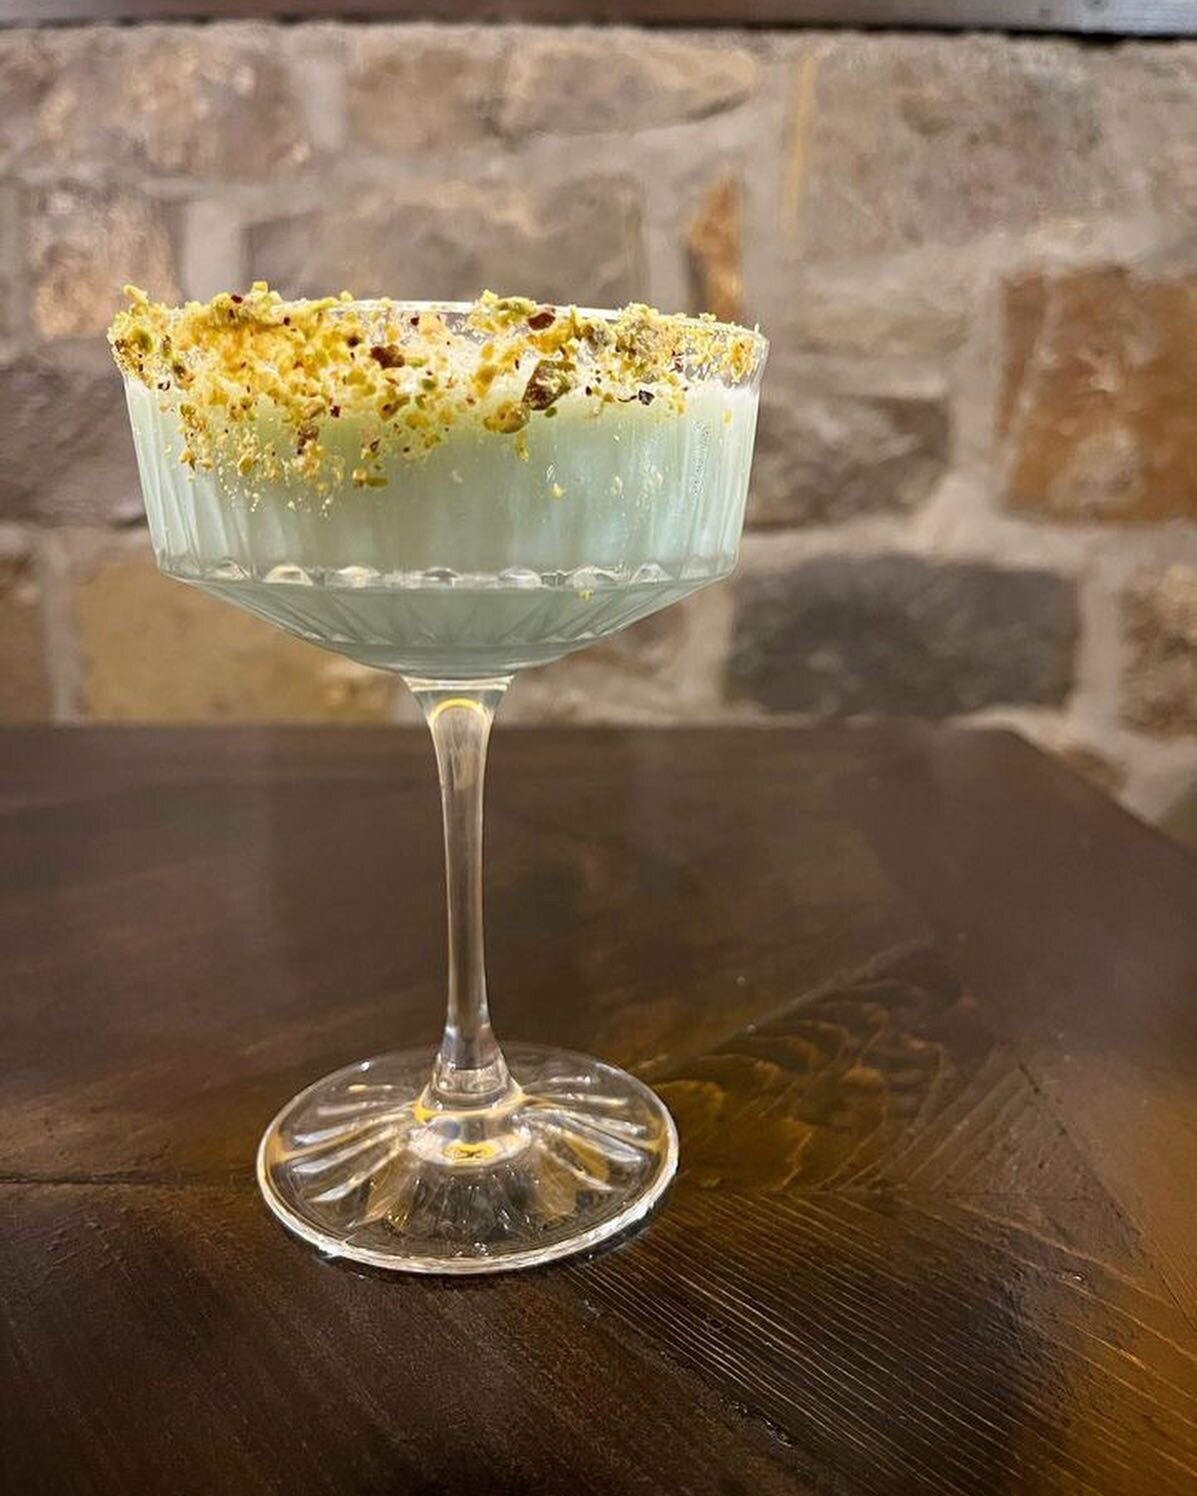 We&rsquo;re a little nuts 🥜 about this weekends&rsquo;s cocktail feature, and we think you will be too! This here is our Pistachio Martini 🍸🍸 lovingly made with Luksusowa vodka (@luksusowaca), Sons of Vancouver Amaretto and Blue Cura&ccedil;ao (@s